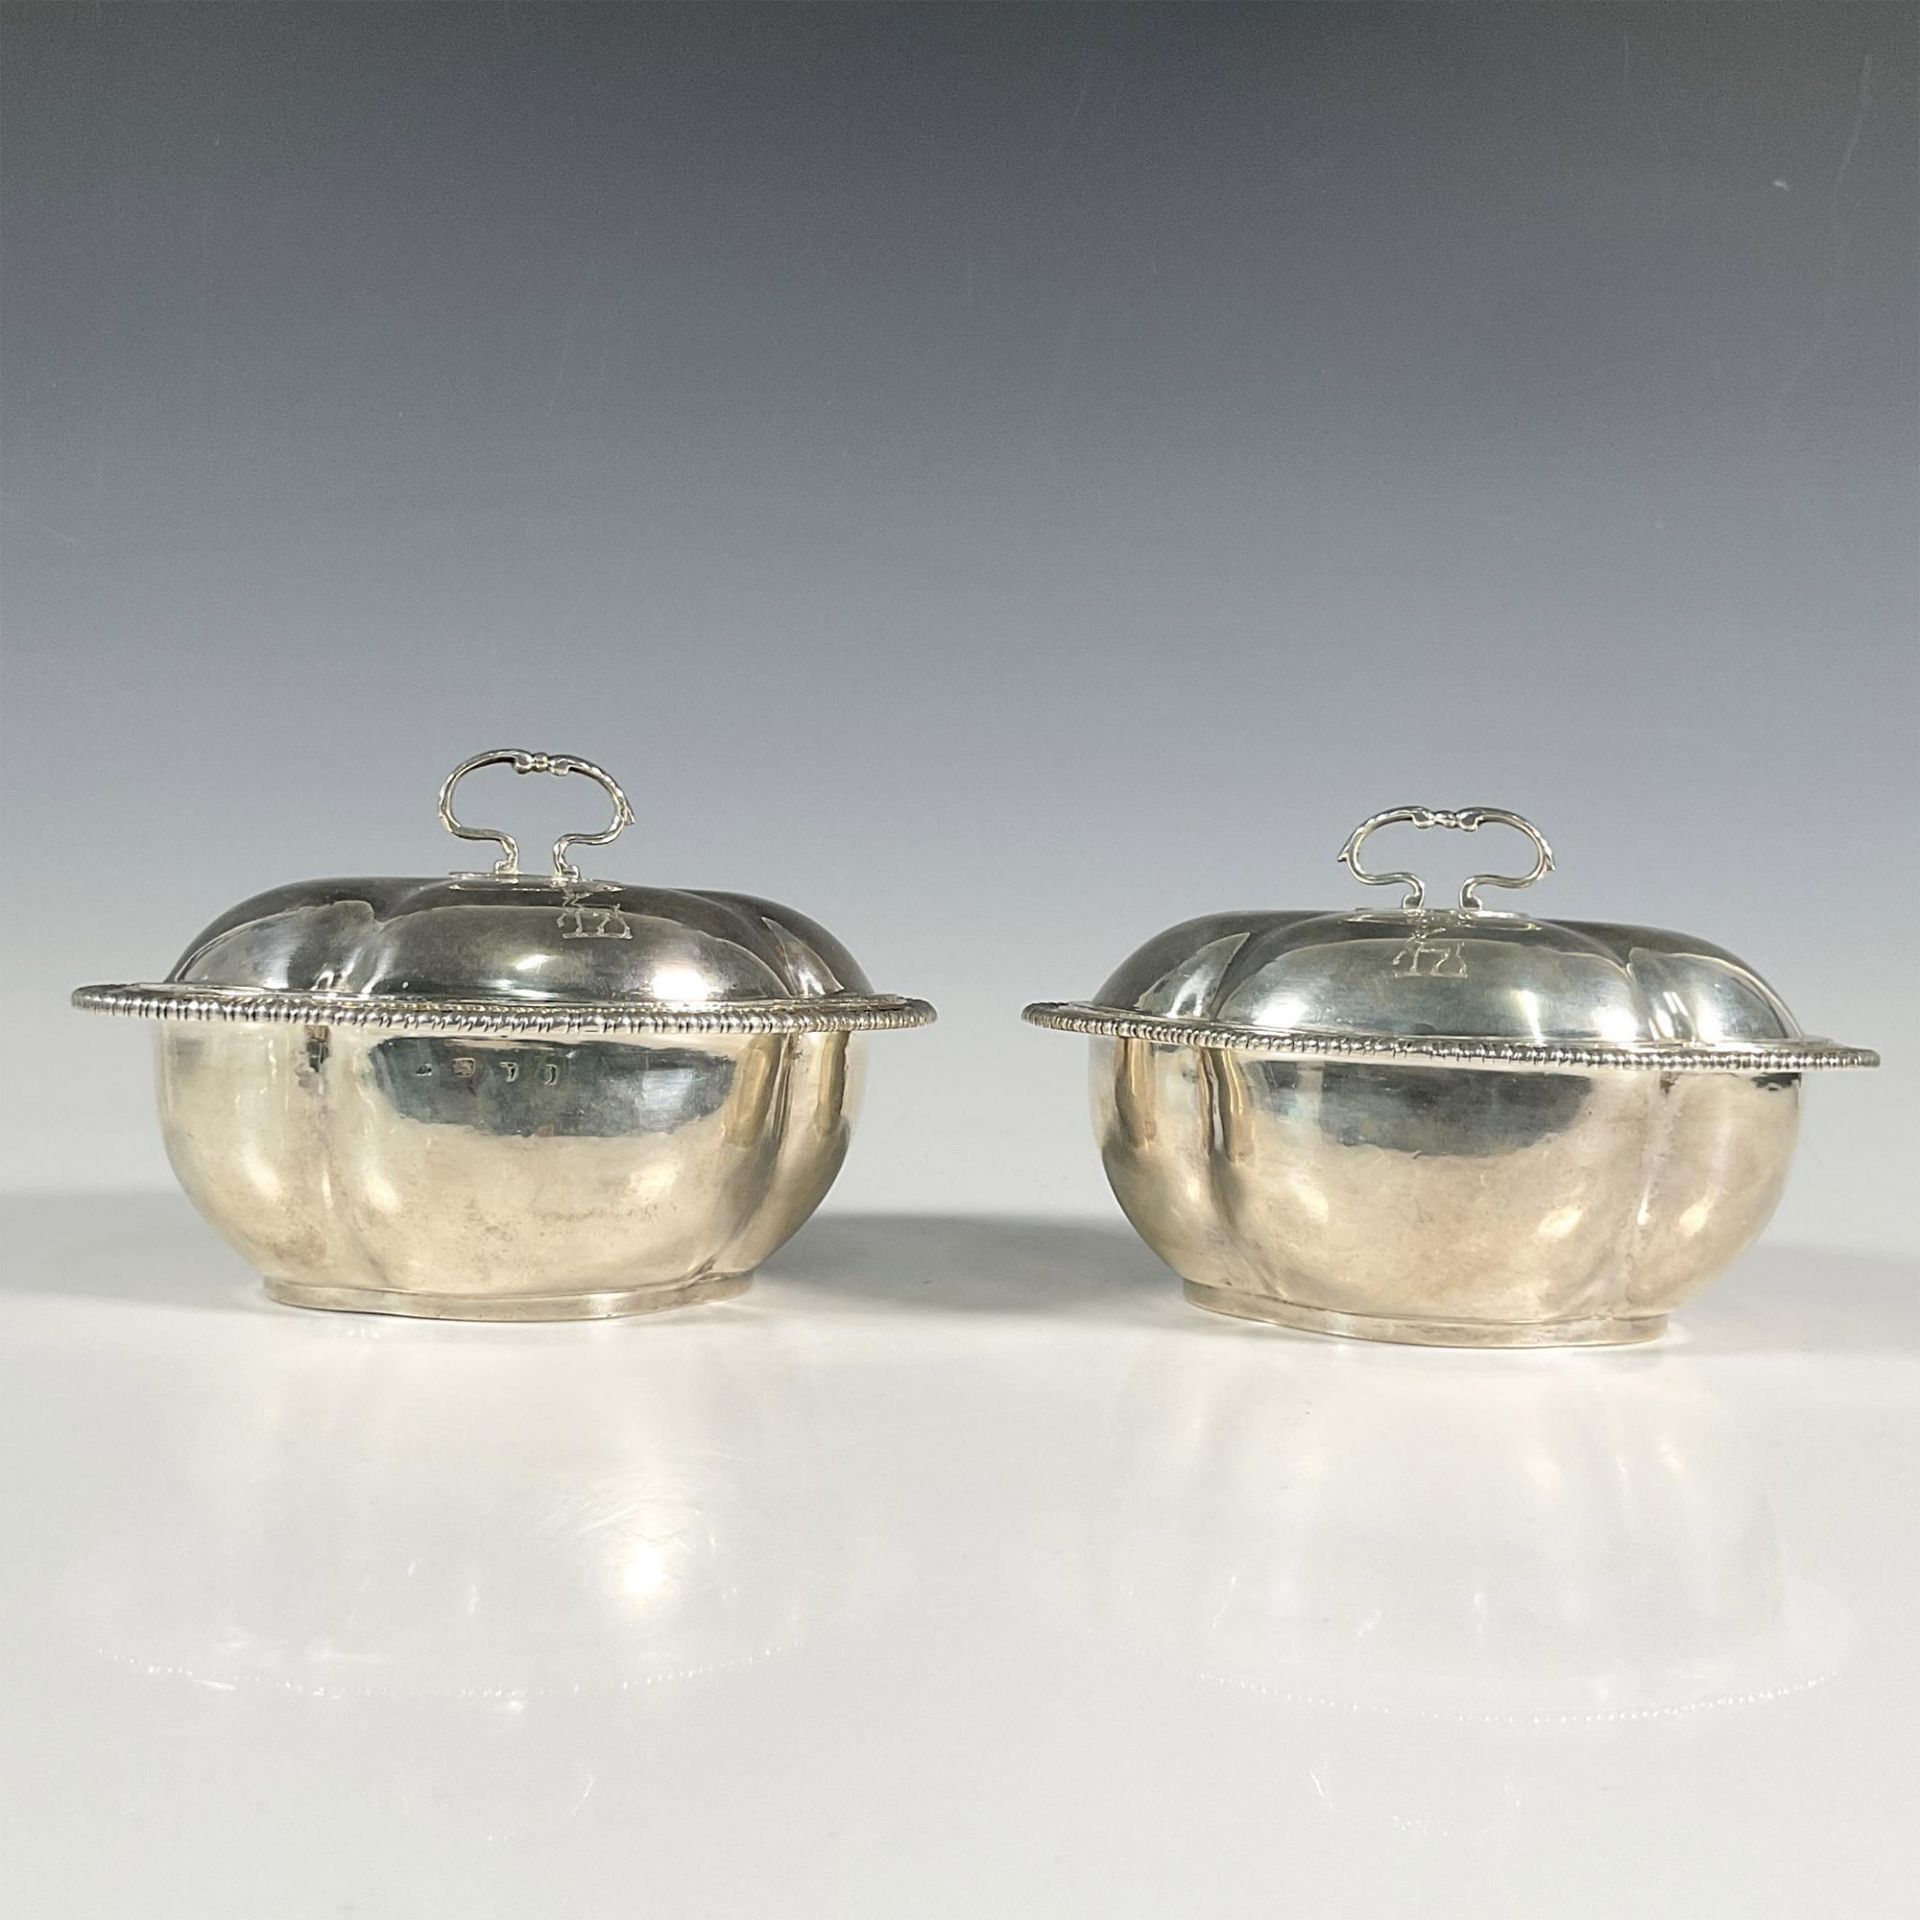 Pair of Thomas Heming George I Silver Covered Saucers - Image 3 of 5